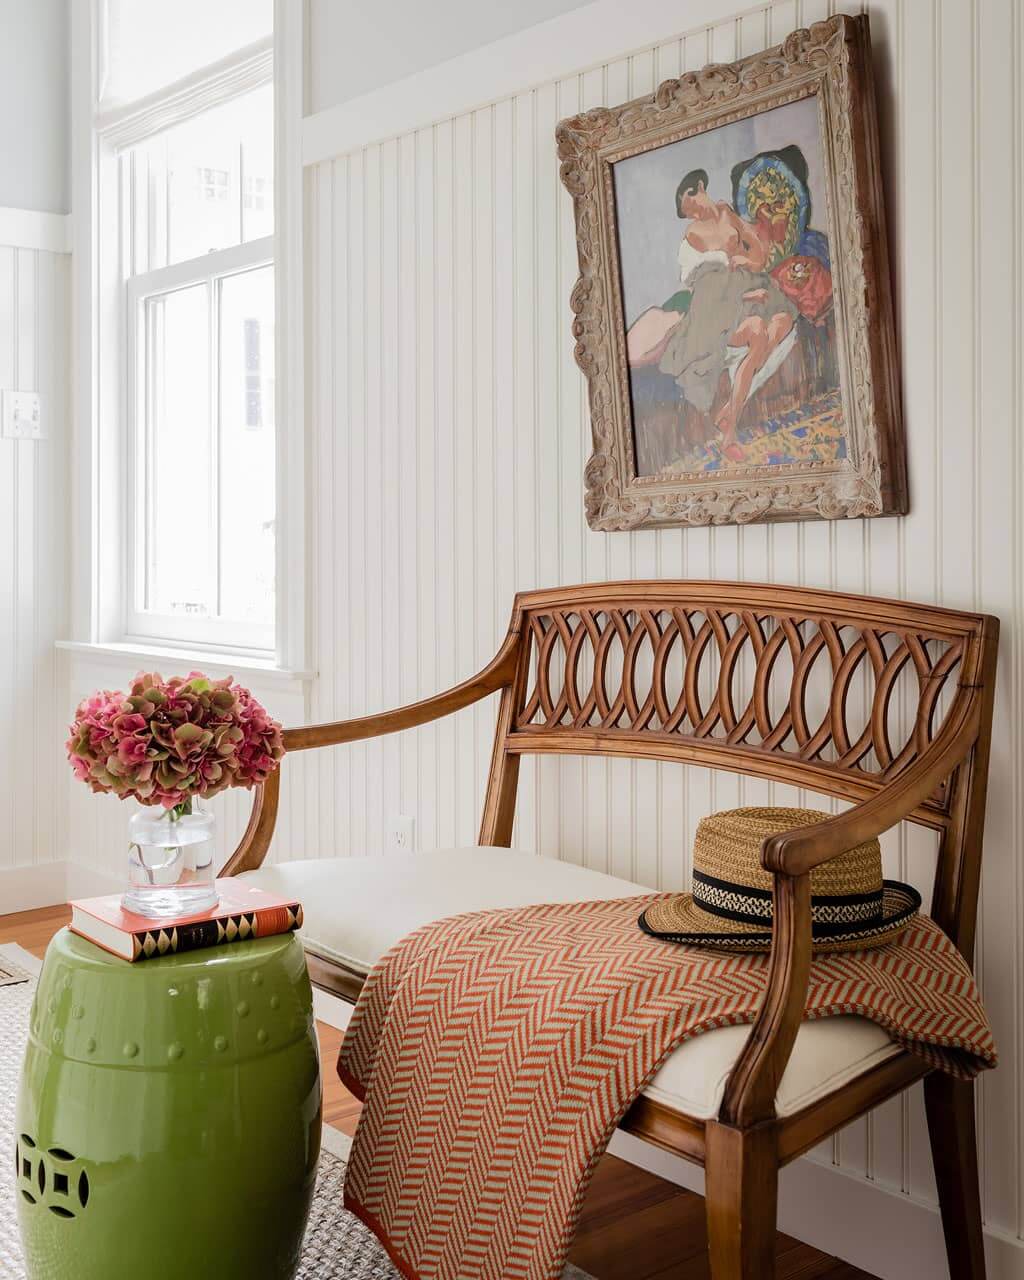 Concord Chic. Sitting room with white beadboard walls and antique bench. Interior design by LeBlanc Interior Design.